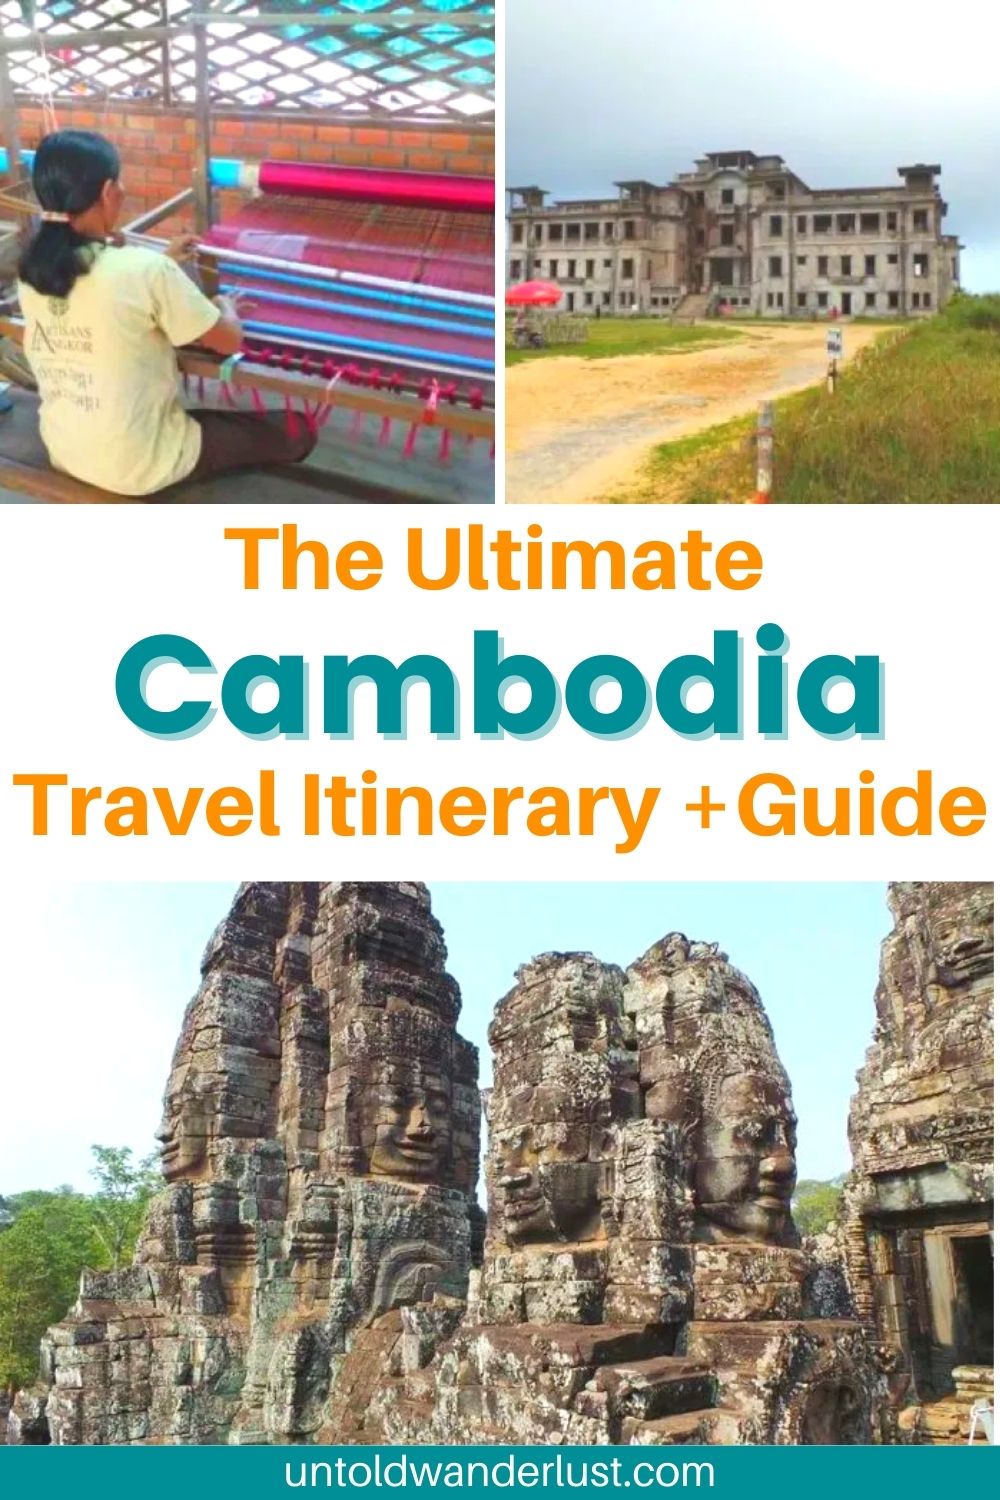 The Ultimate Cambodia Travel Itinerary + Guide